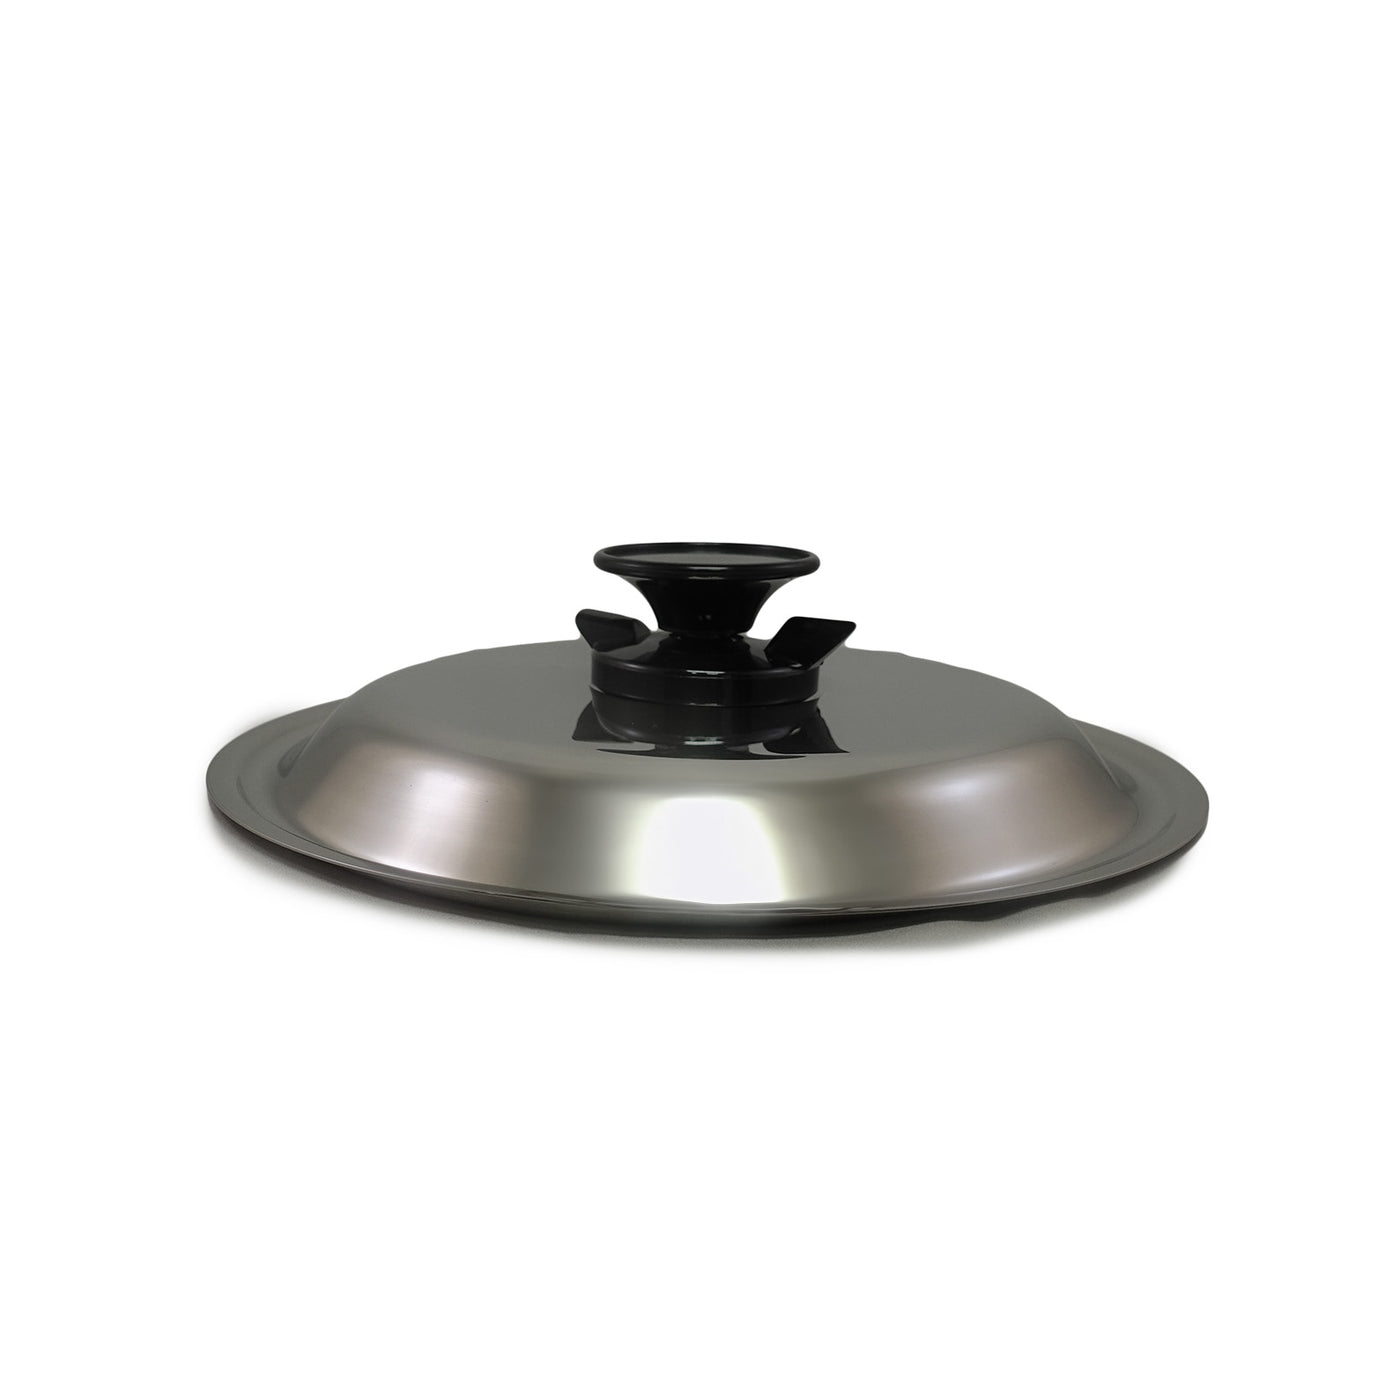 10.5" Fry Pan Lid with Knob - Clearance